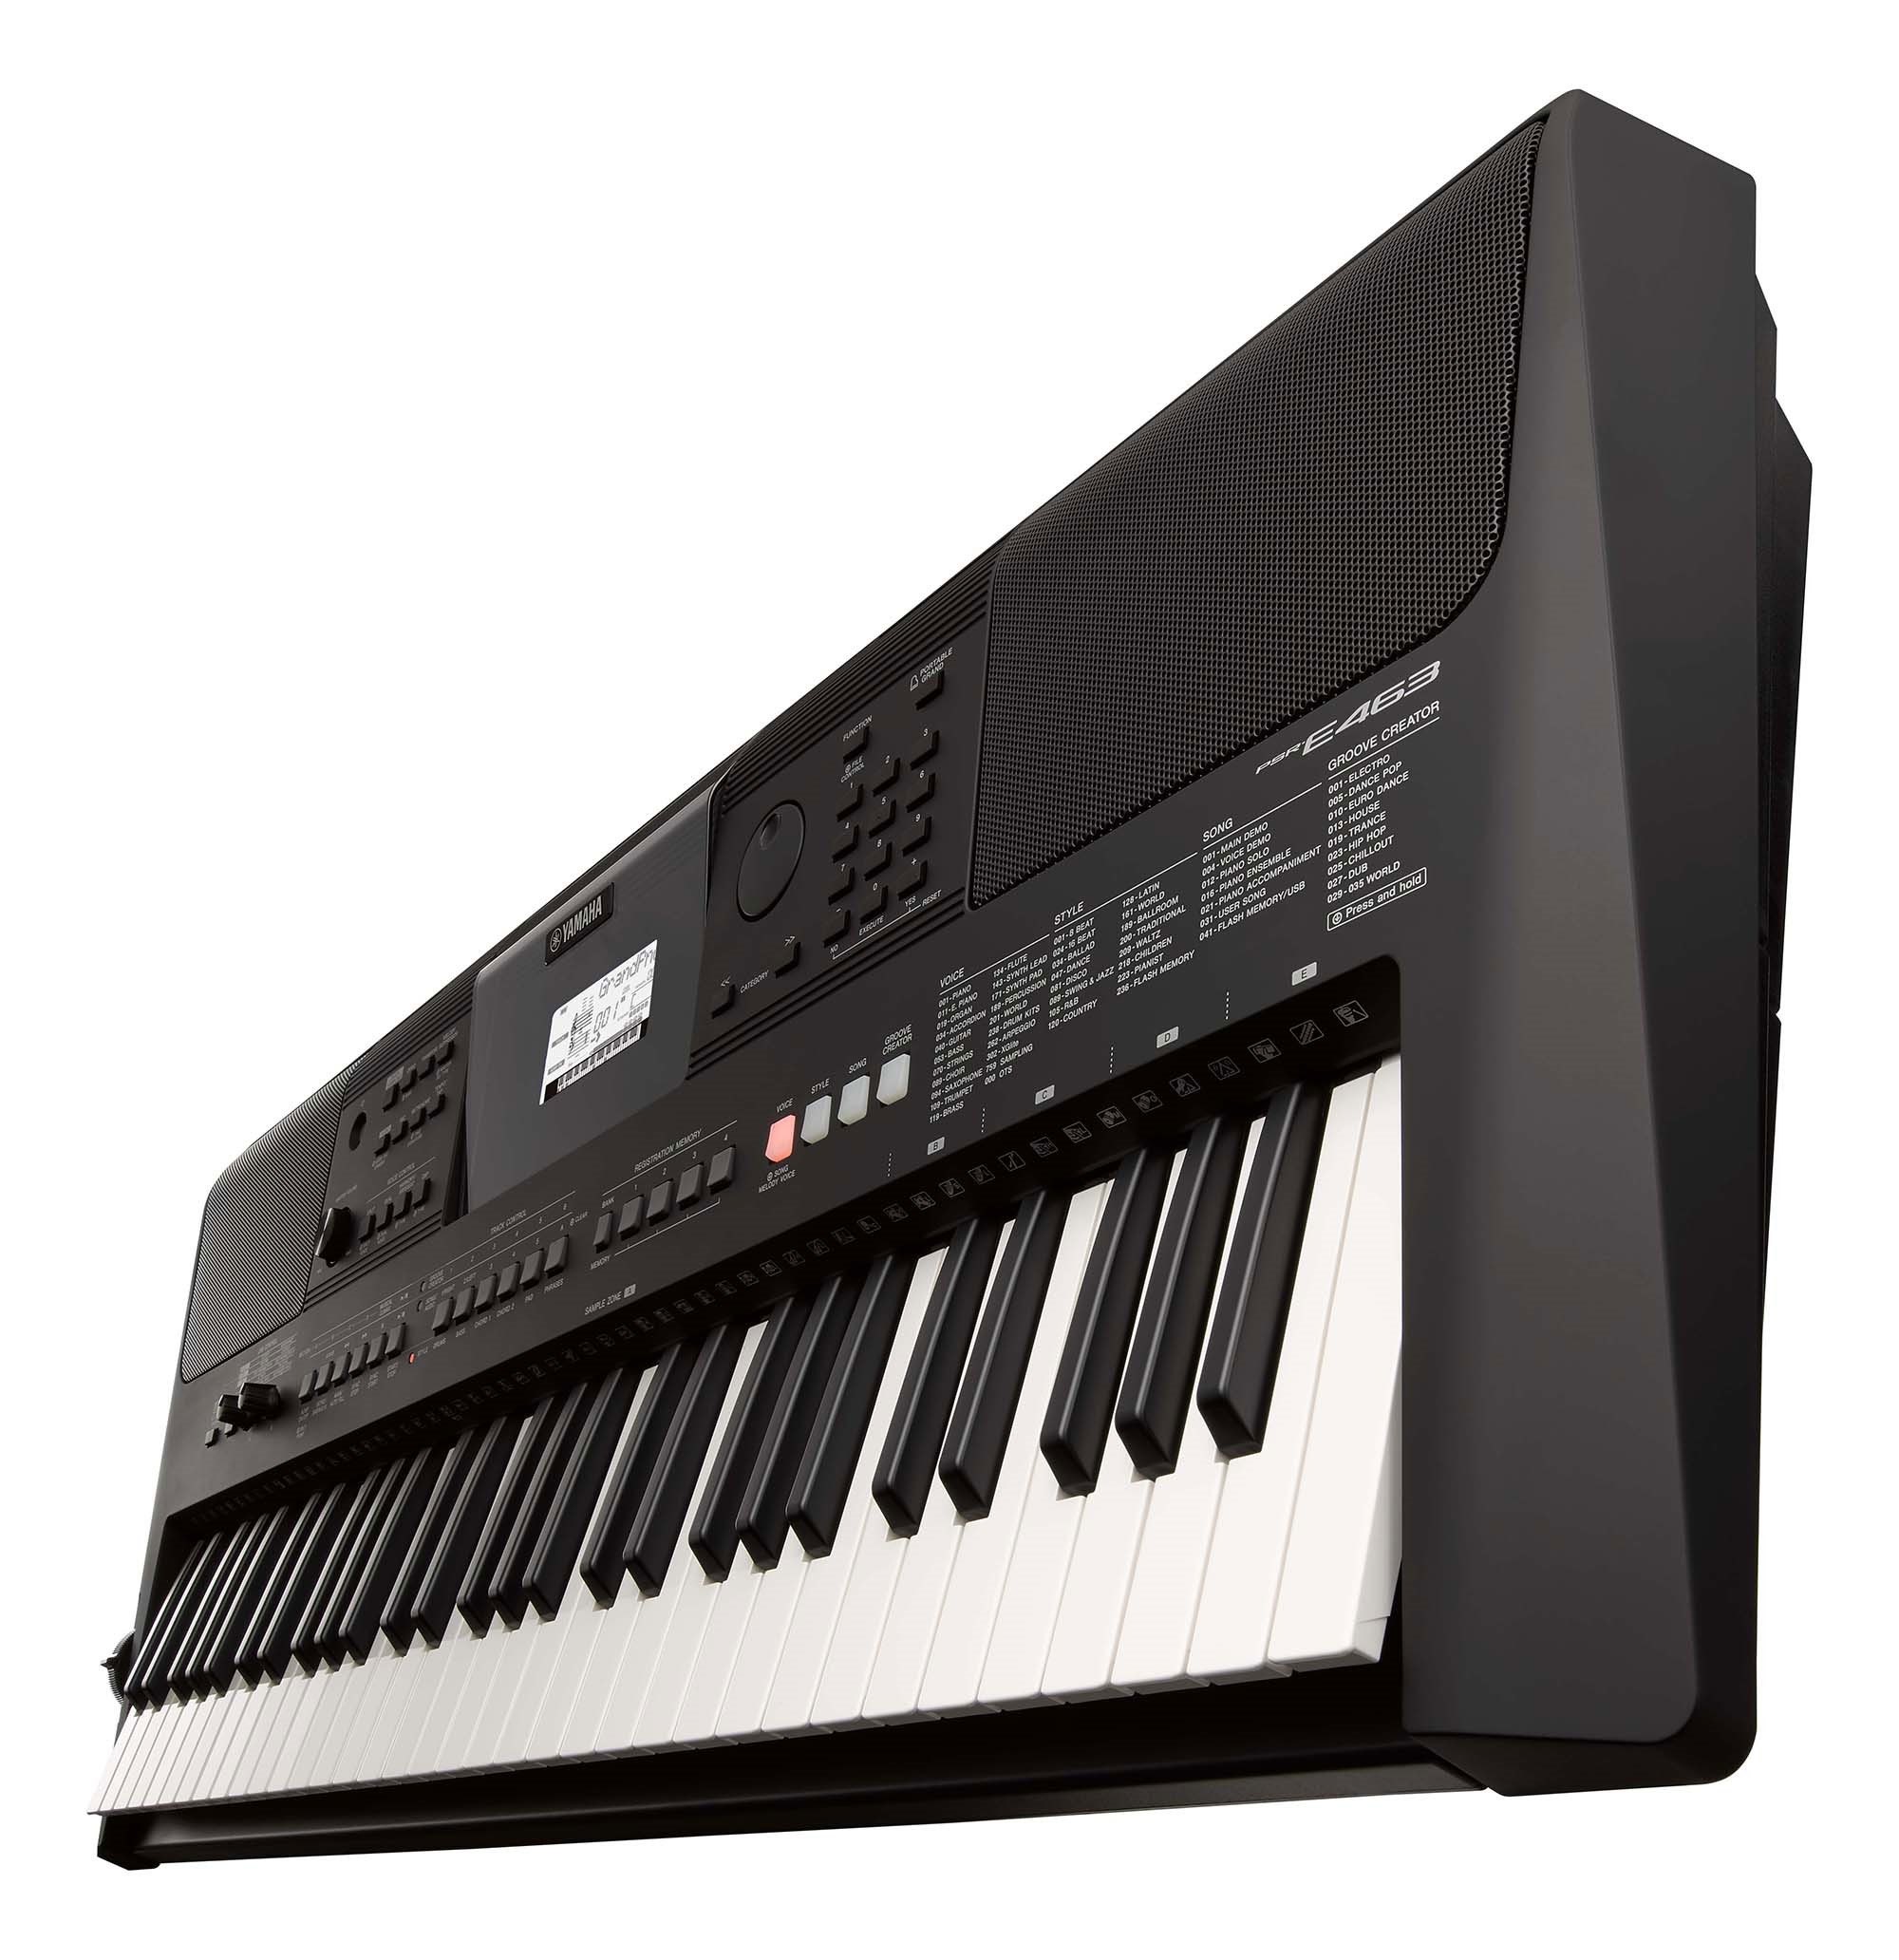 PSR-E463 - Accessories - Portable Keyboards - Keyboard Instruments 